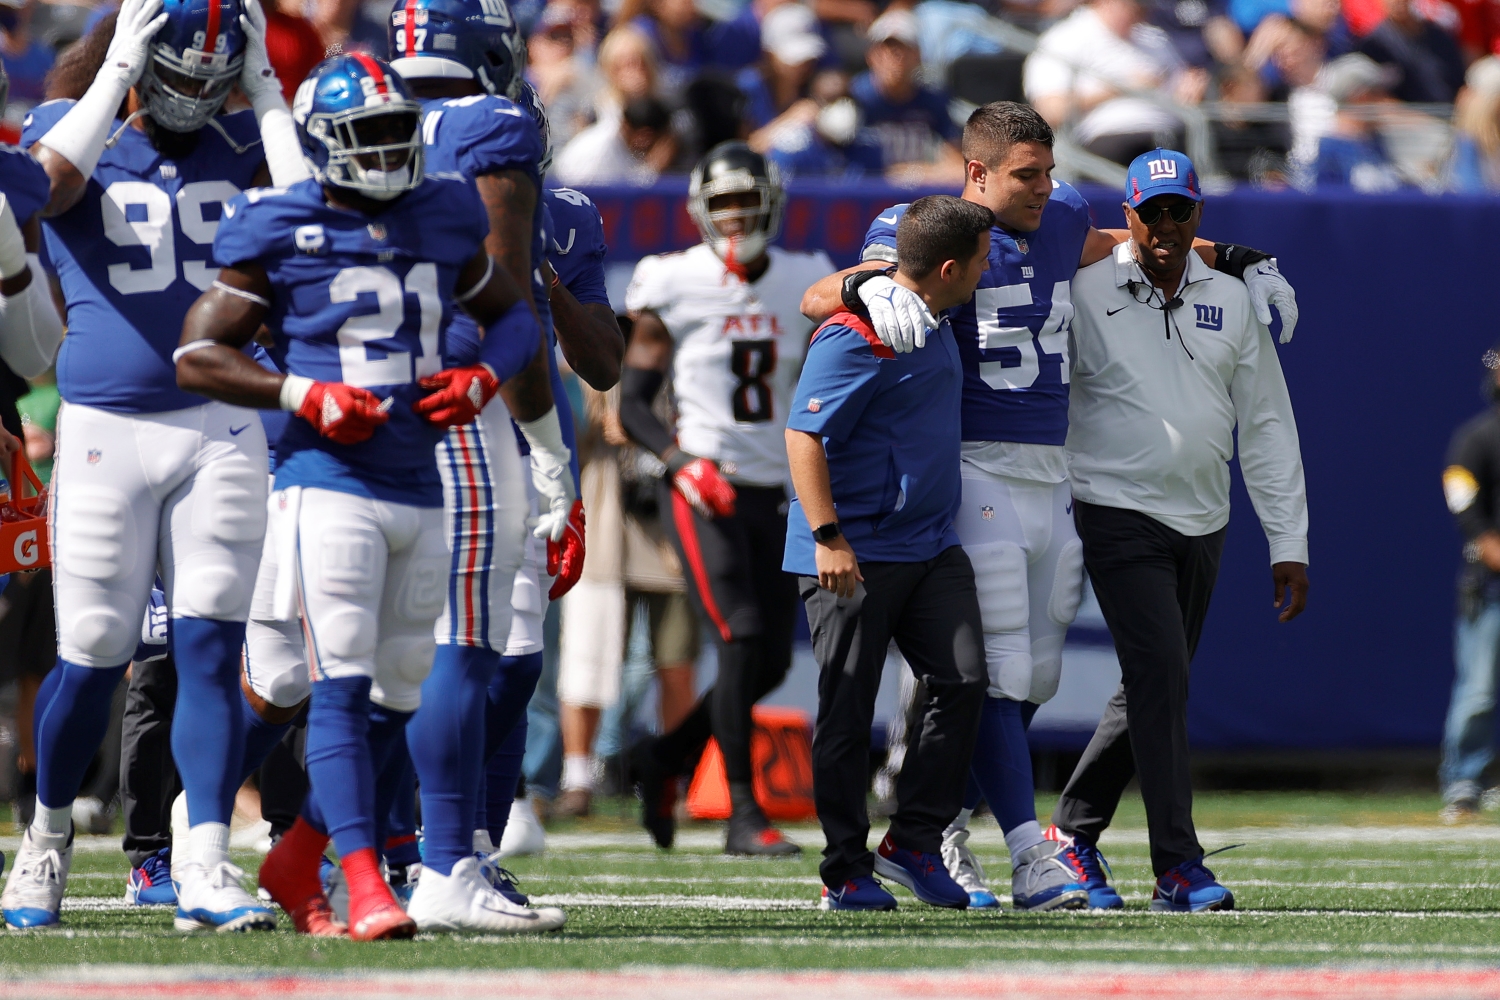 New York Giants linebacker Blake Martinez is helped off the field after suffering an injury.